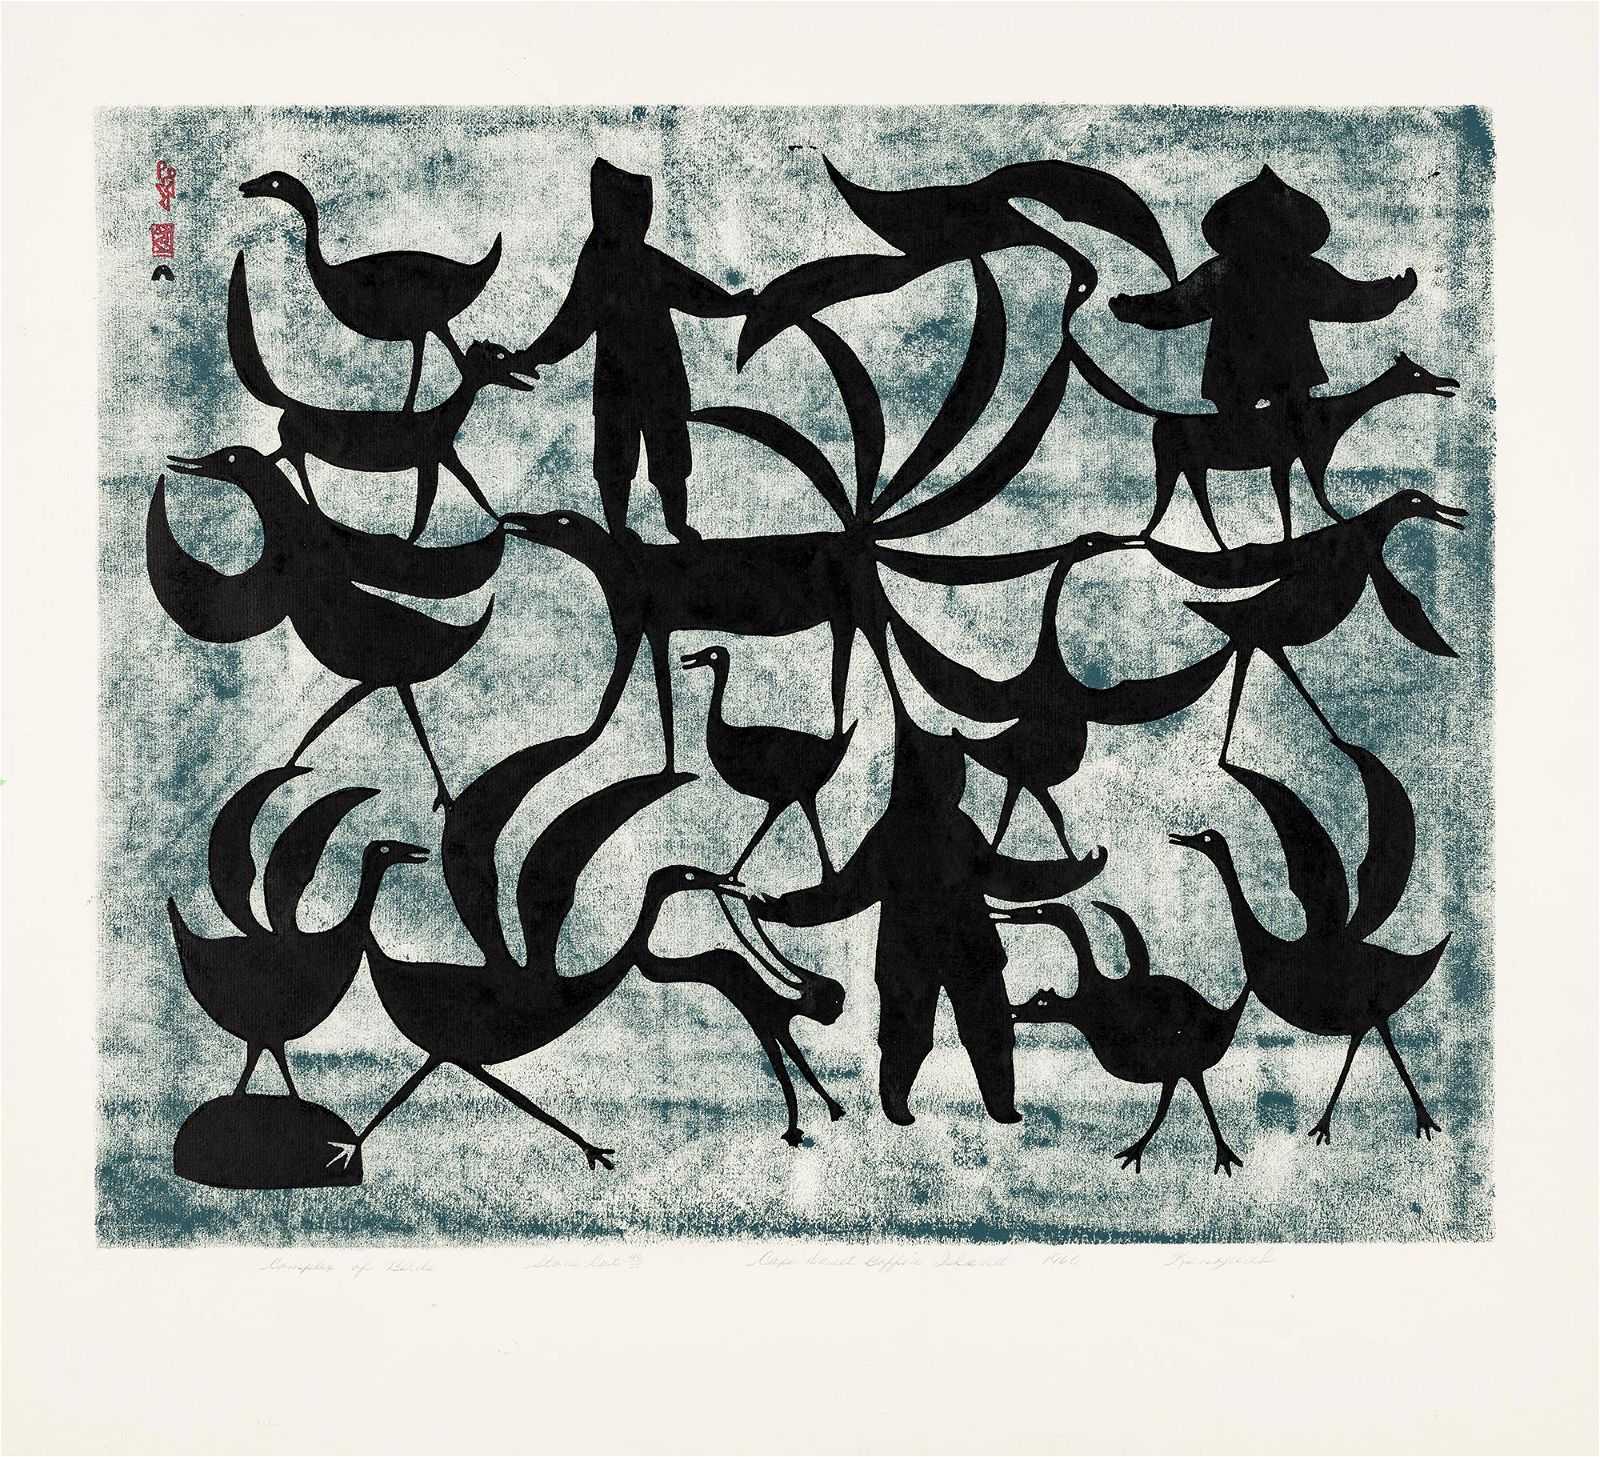 Kenojuak Ashevak’s 1960 stonecut print ‘Complex of Birds’ earned CA$26,000 ($19,210) plus the buyer’s premium in July 2020. Image courtesy of First Arts Premiers Inc. and LiveAuctioneers.